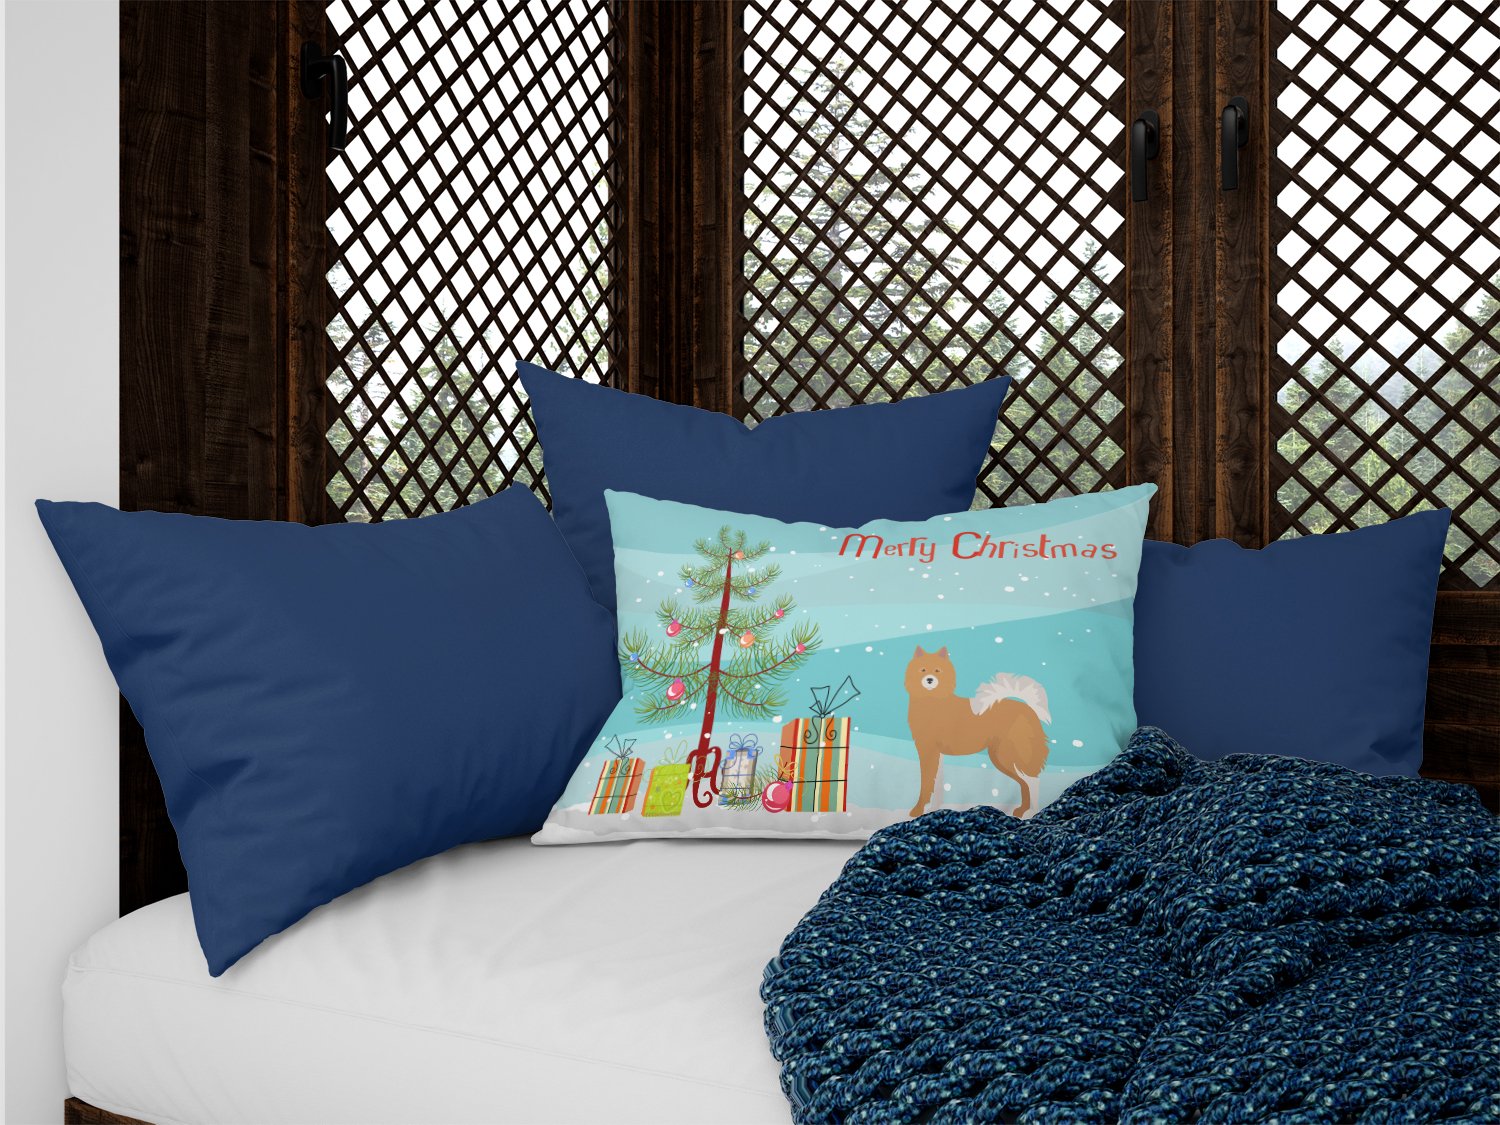 Brown & White Elo dog Christmas Tree Canvas Fabric Decorative Pillow CK3451PW1216 by Caroline's Treasures